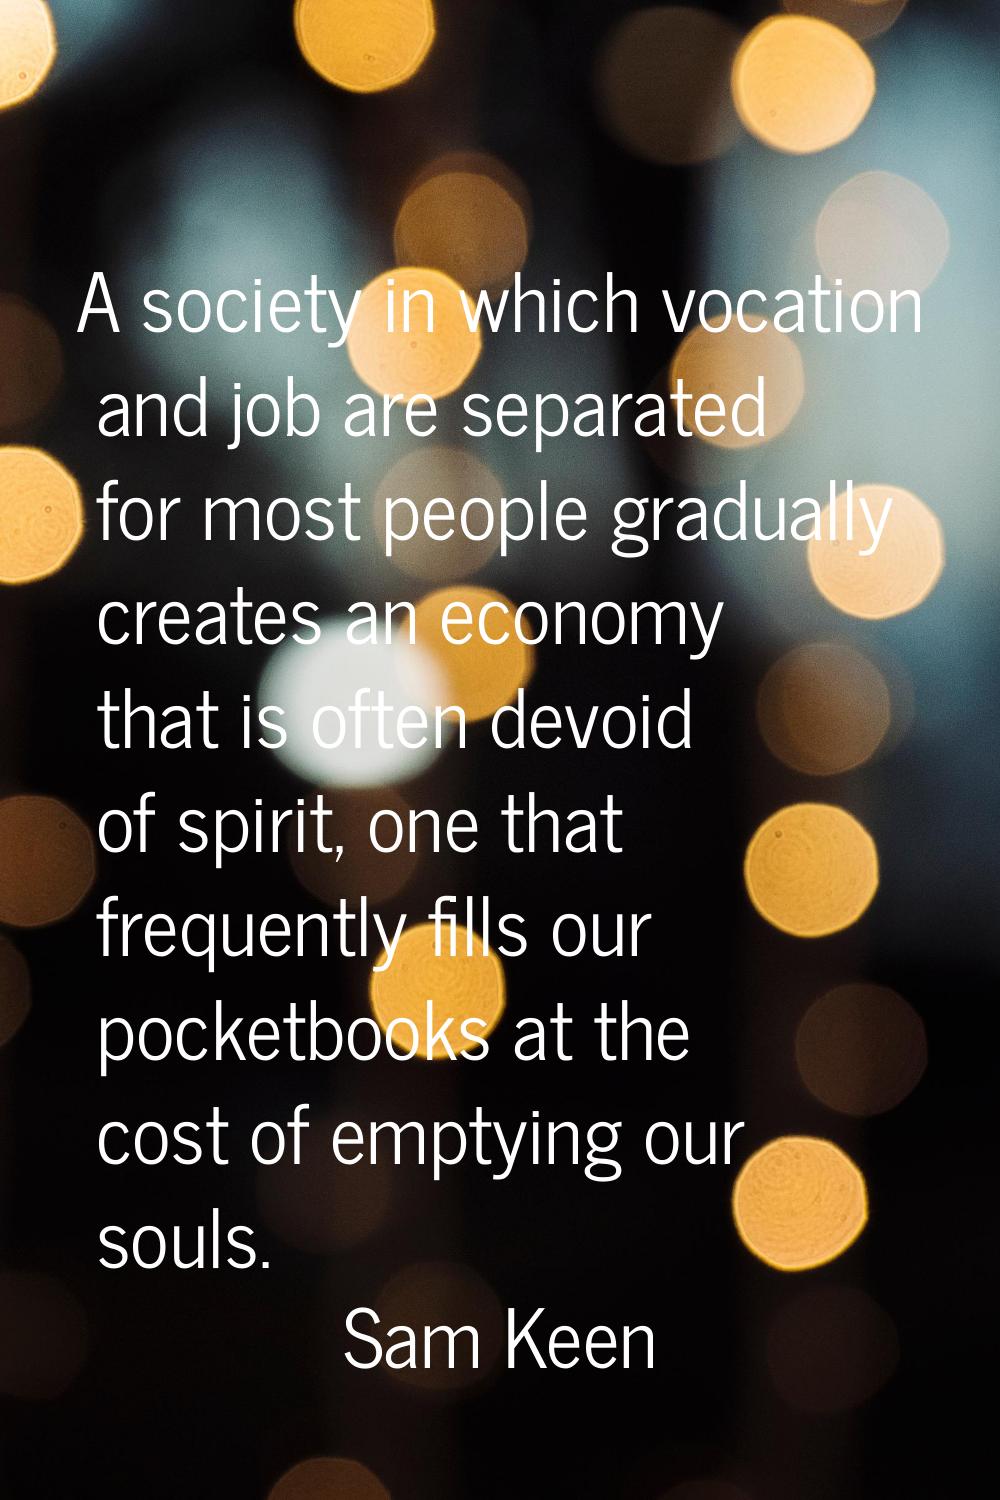 A society in which vocation and job are separated for most people gradually creates an economy that